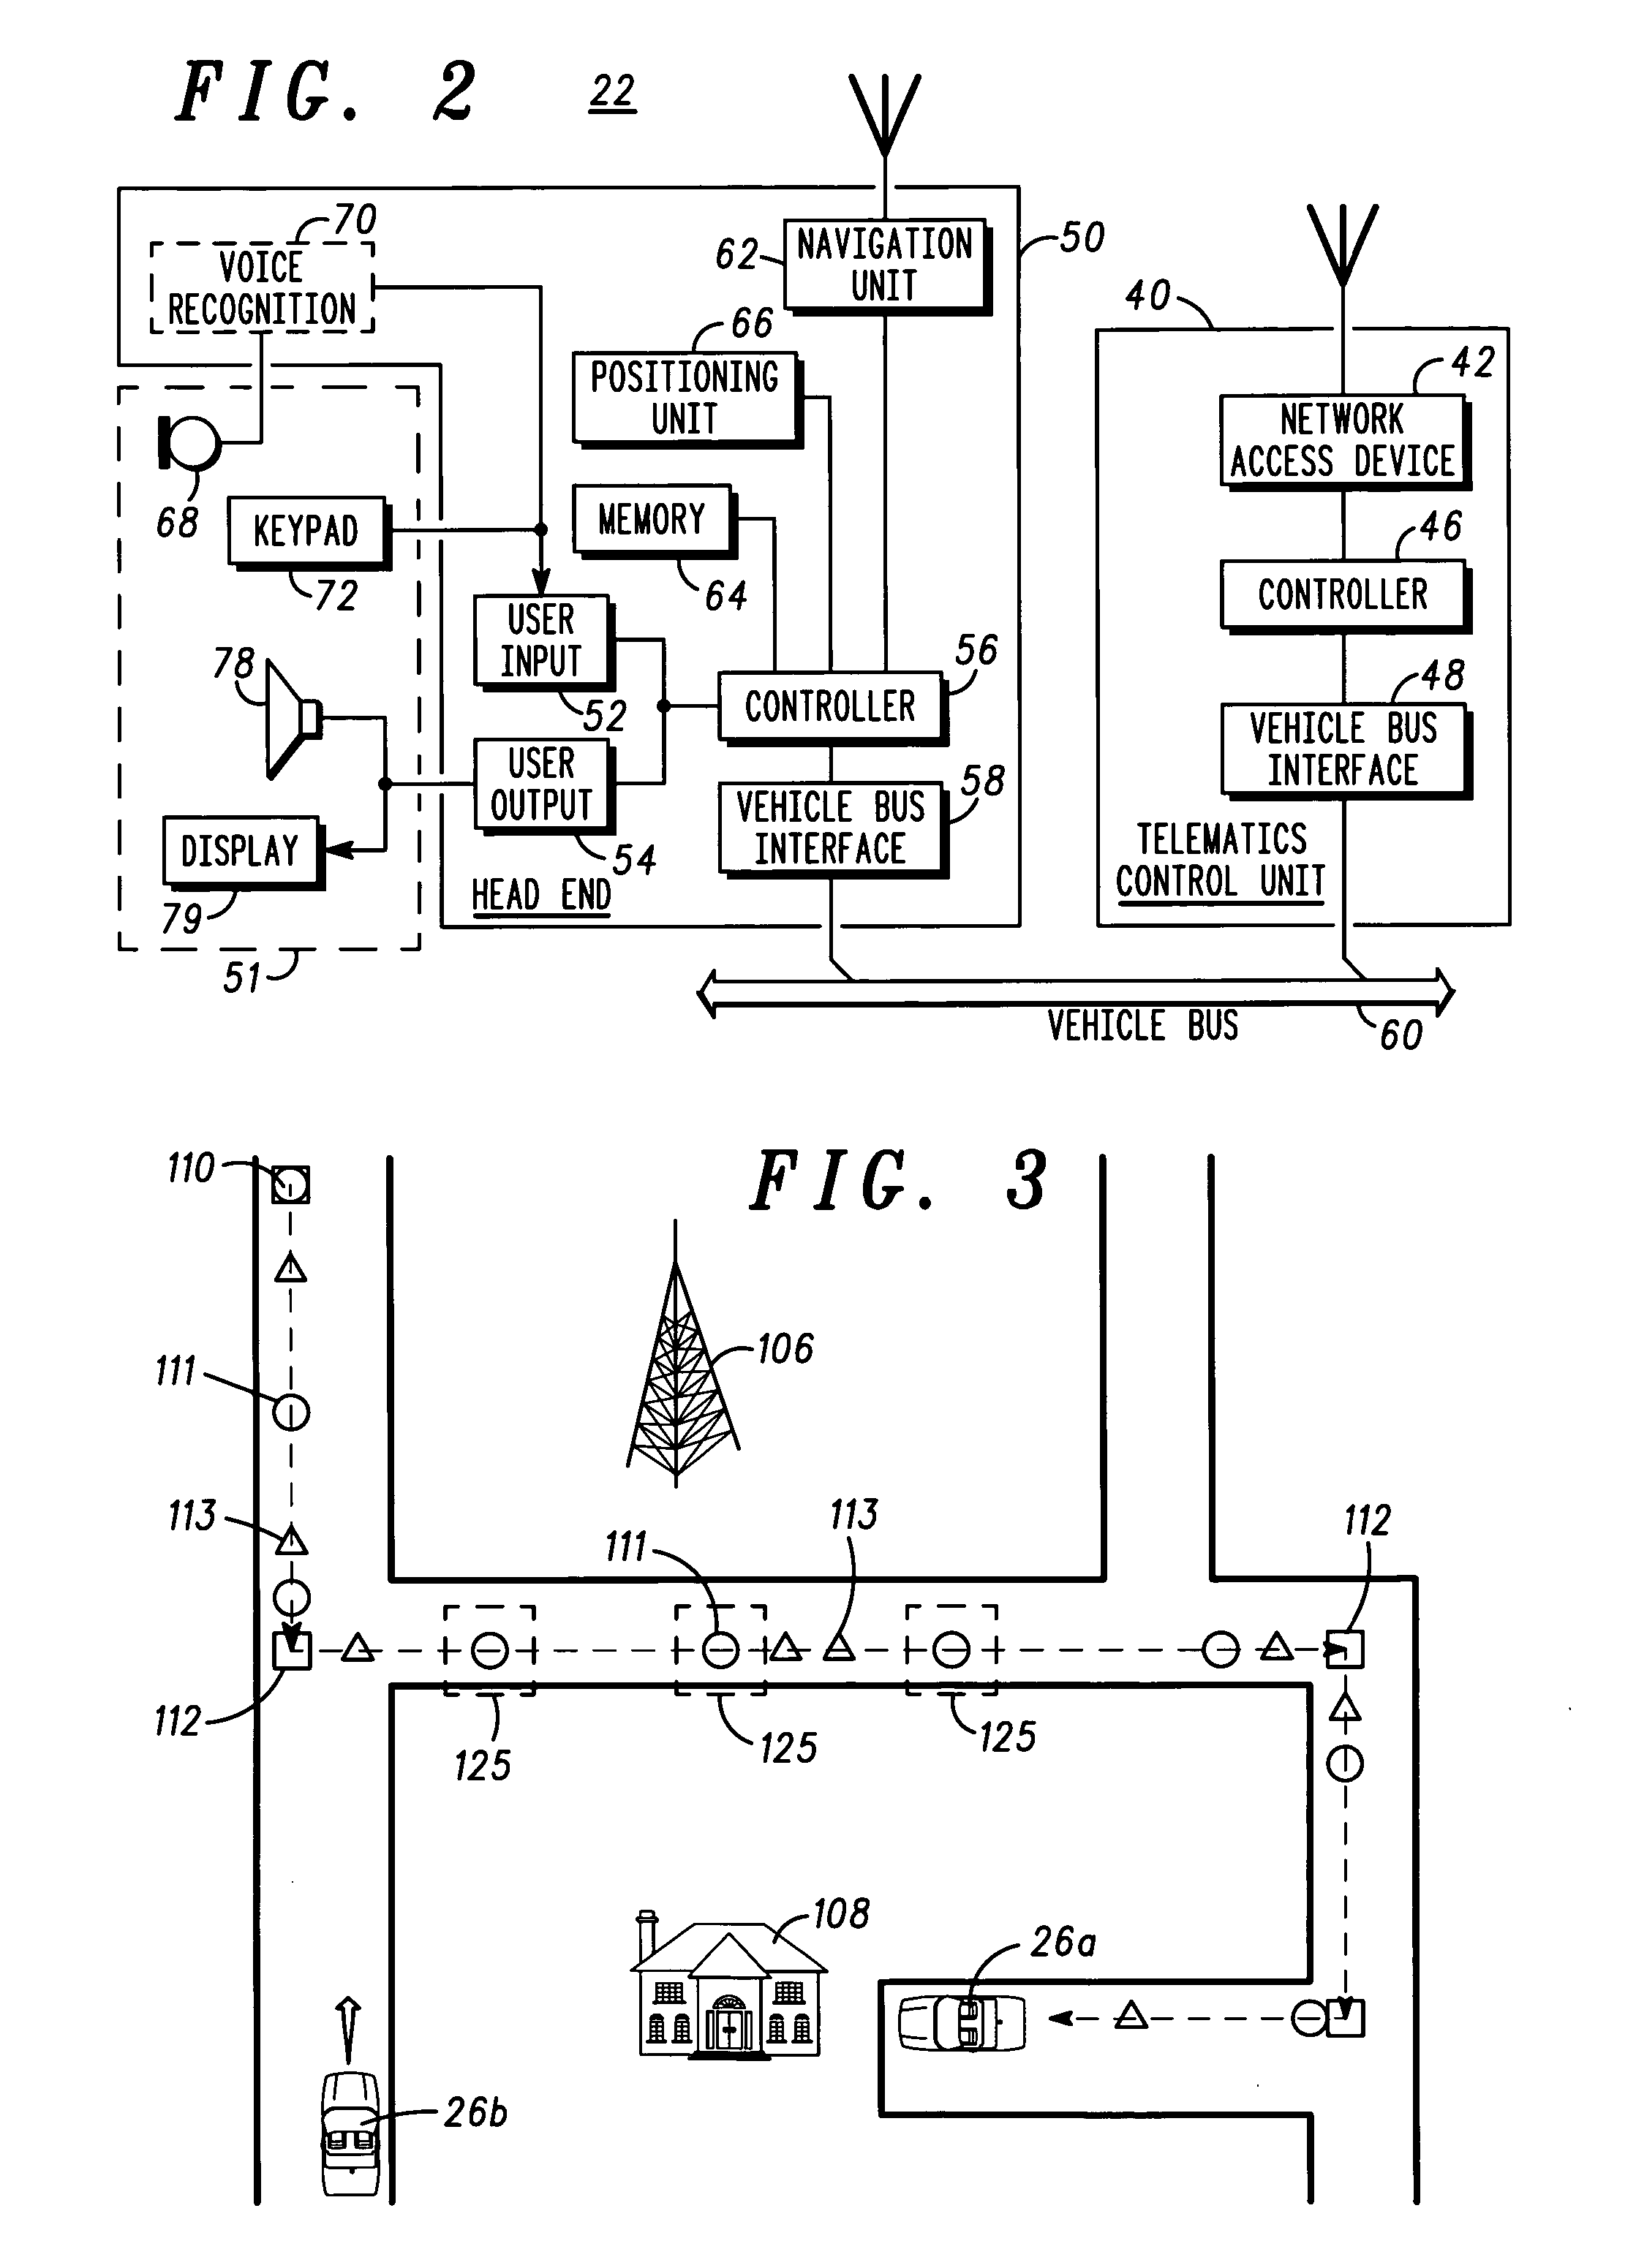 Methods for displaying a route traveled by mobile users in a communication network